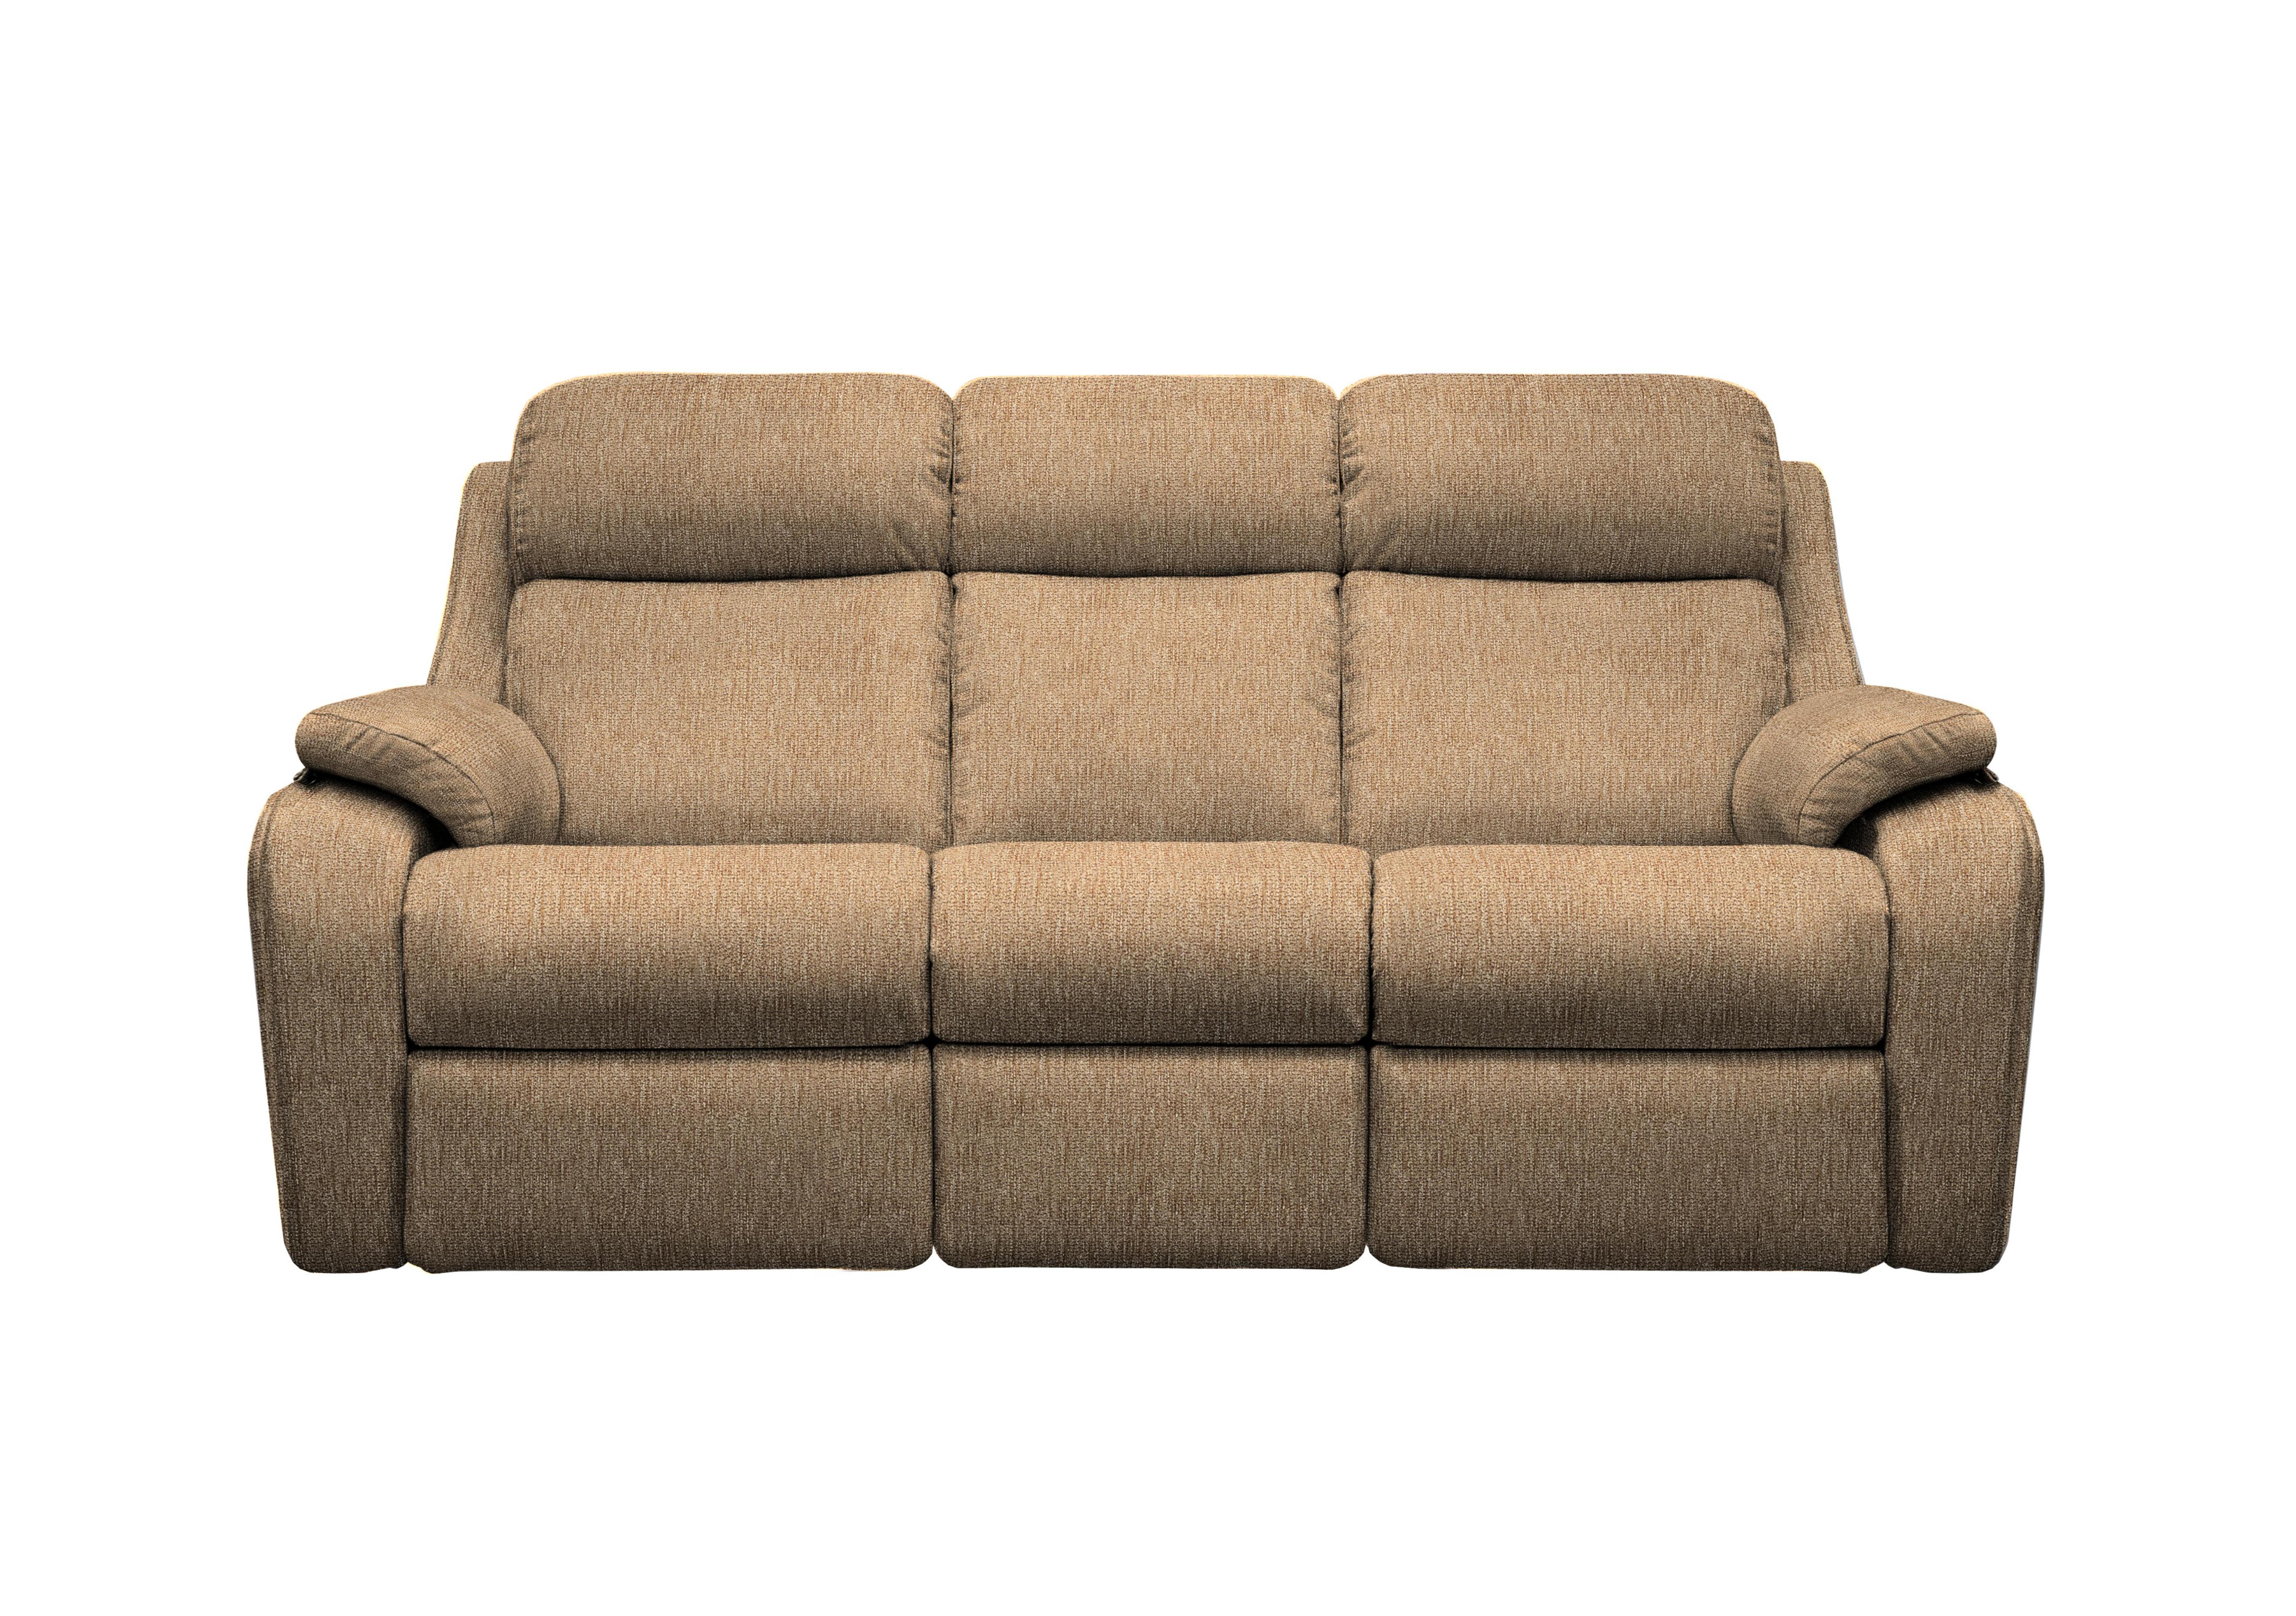 Kingsbury 3 Seater Fabric Power Recliner Sofa with Power Headrests in A070 Boucle Cocoa on Furniture Village